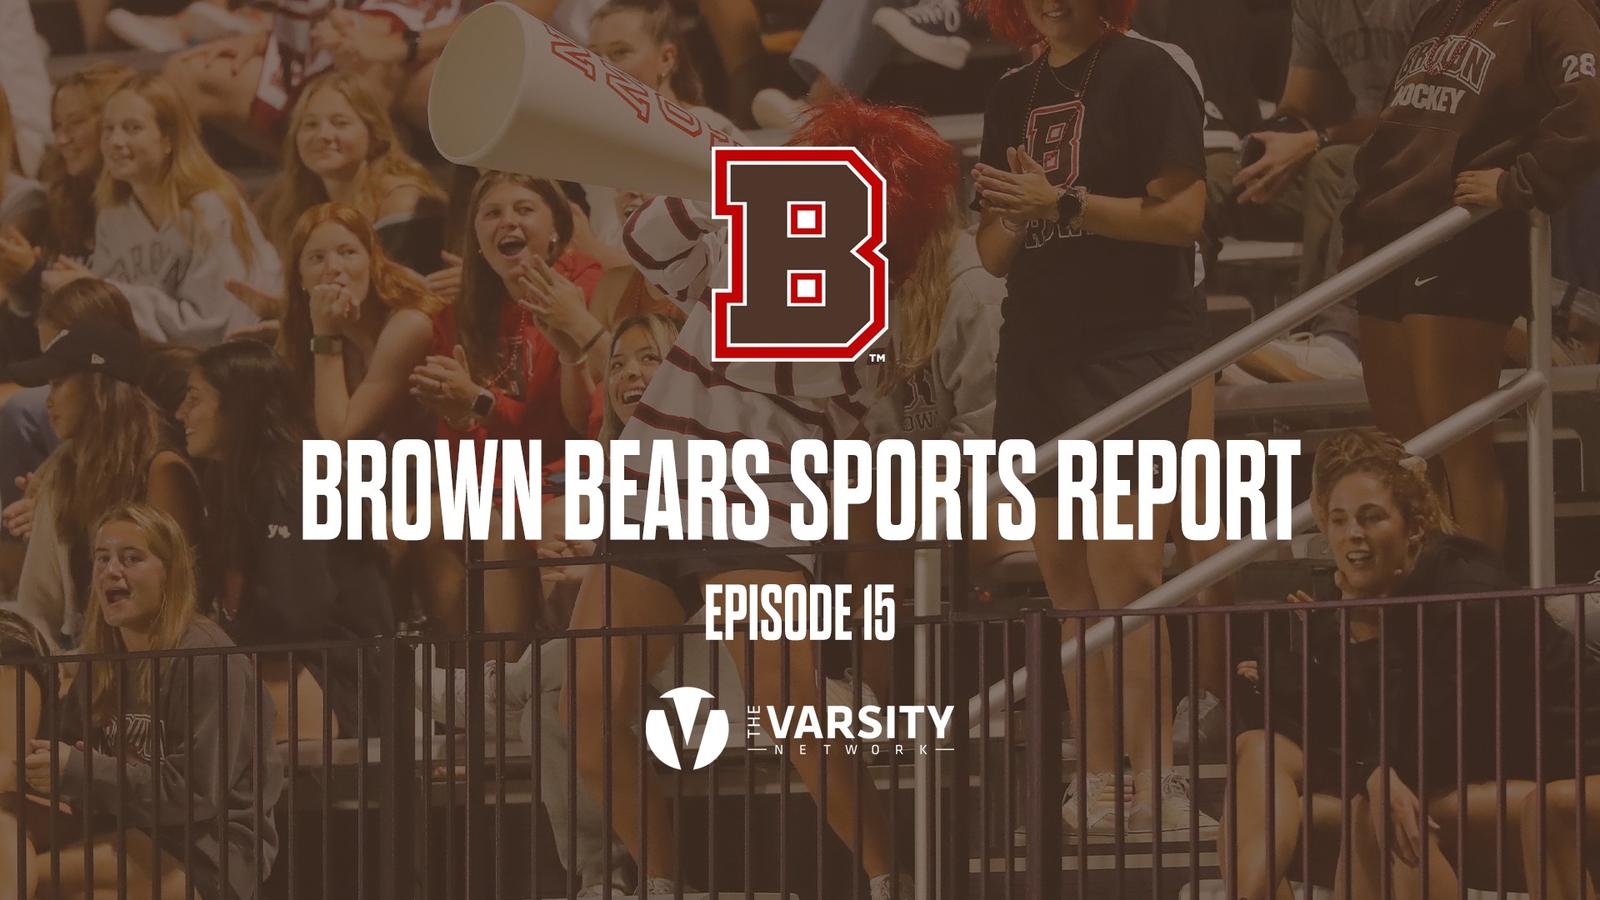 Episode 15 of the Brown Bears Sports Report